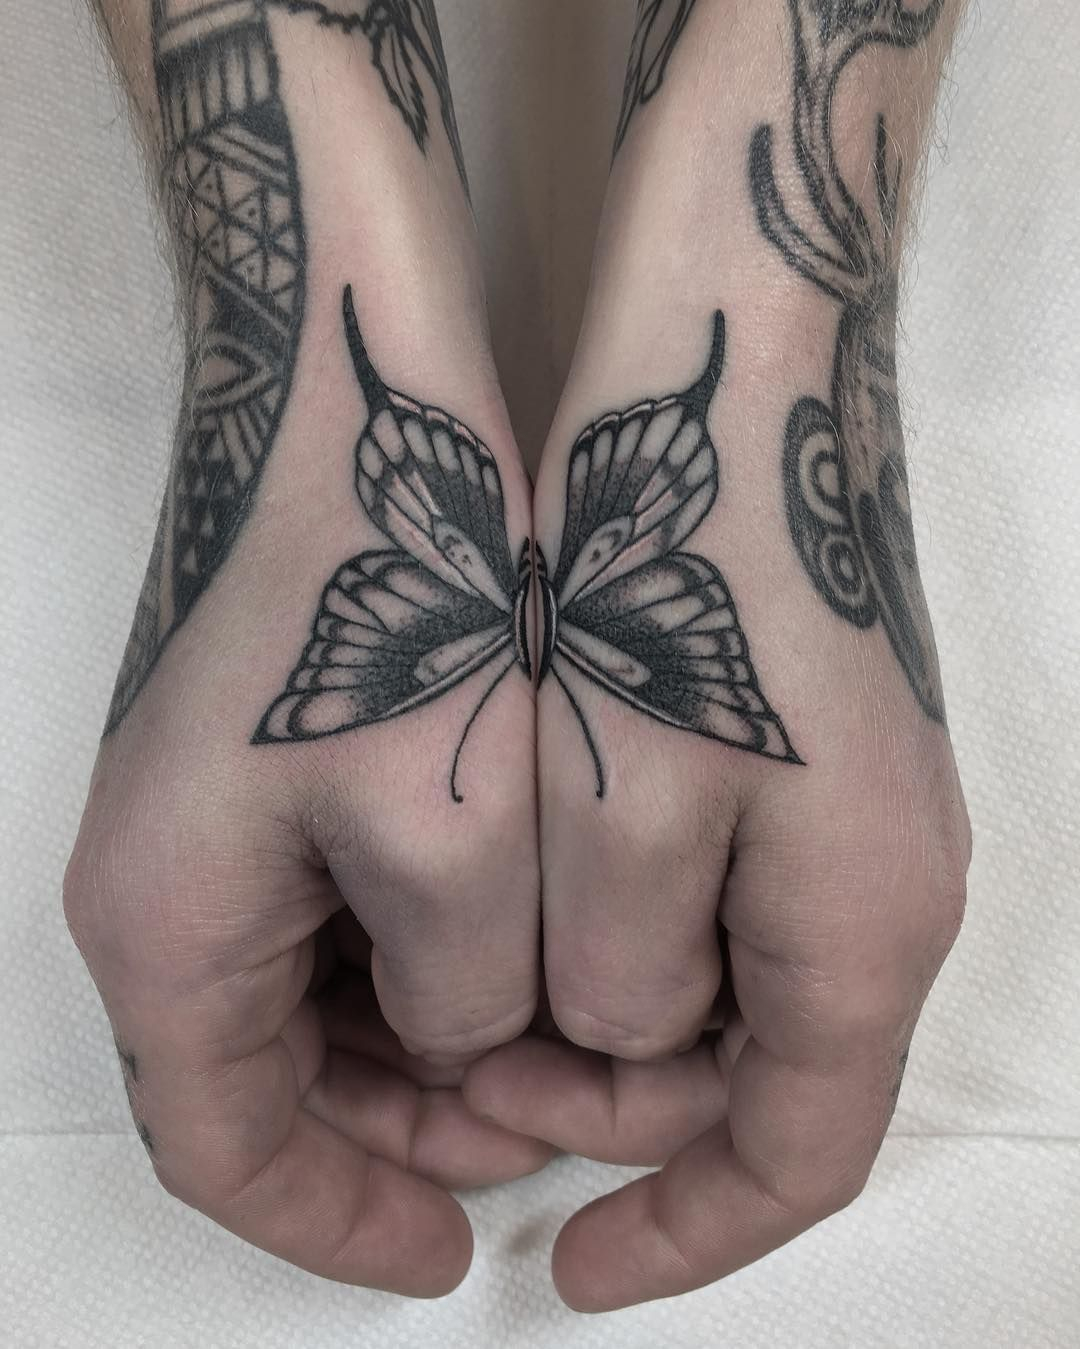 Butterfly Tattoo On The Hand Butterfly Tattoo Ideas Tattoos pertaining to dimensions 1080 X 1349